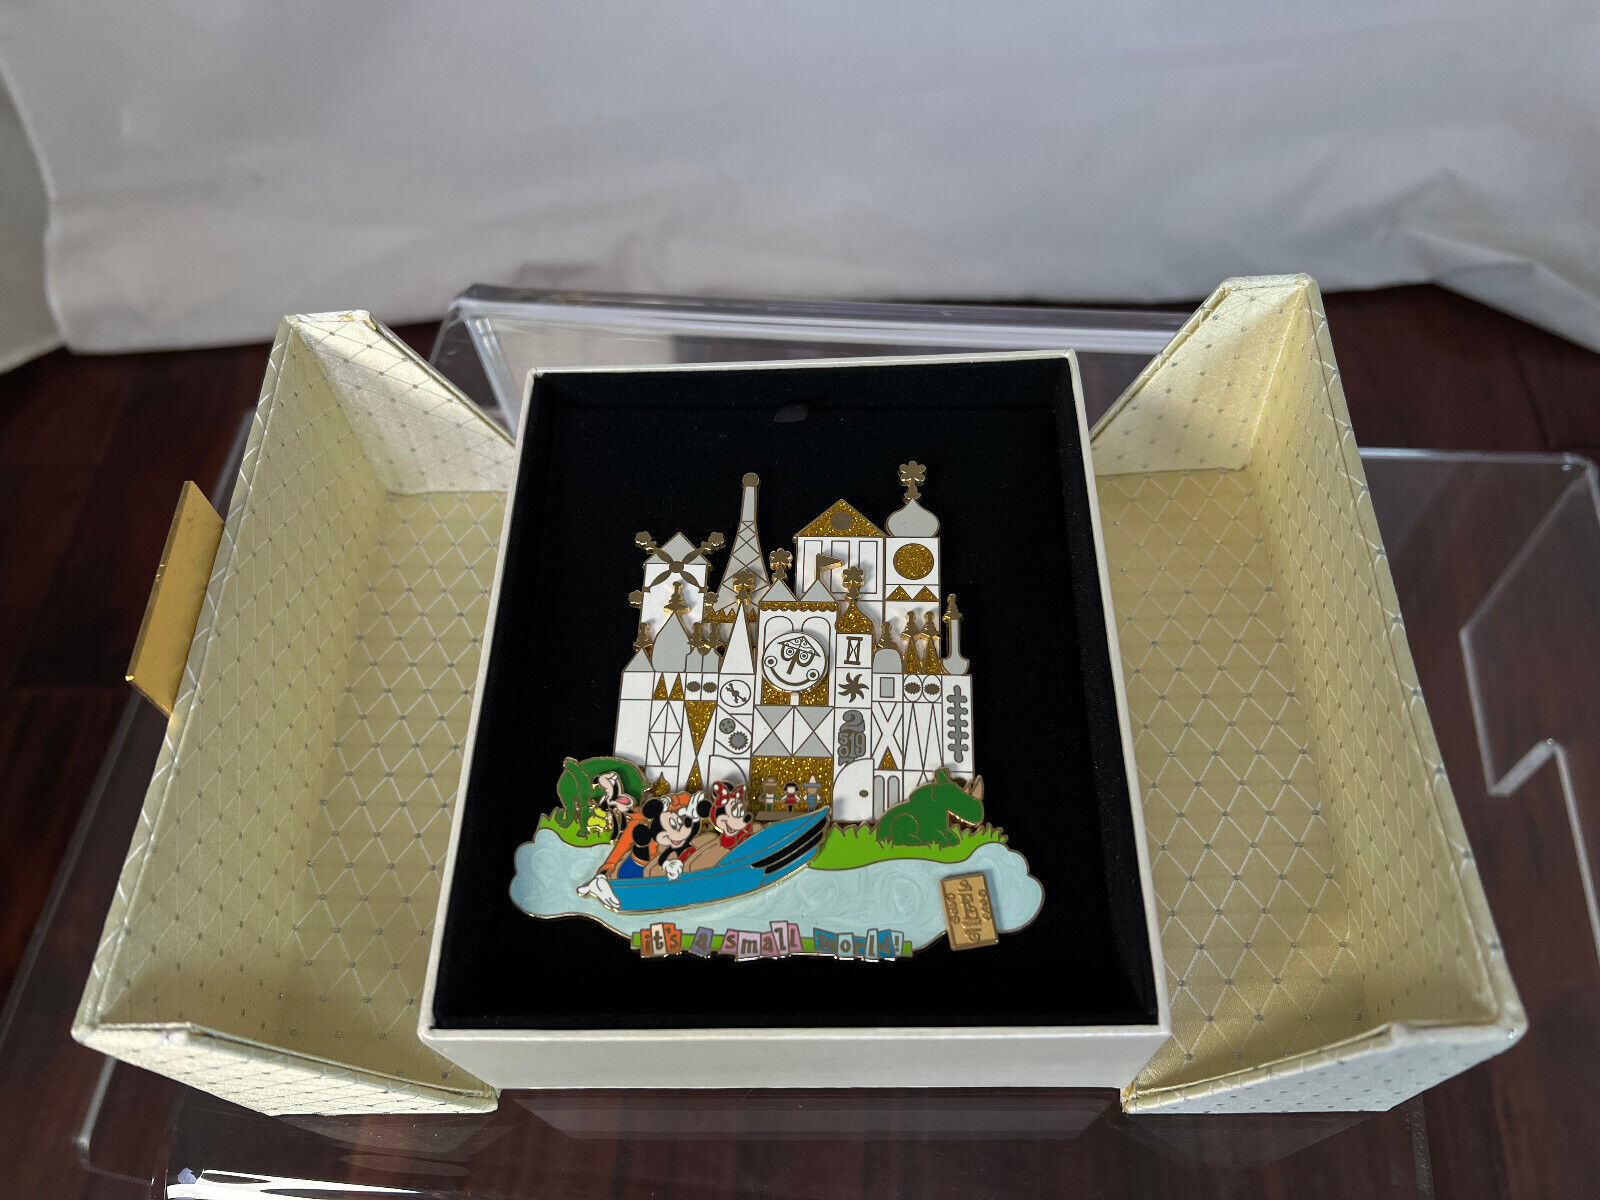 DISNEY DLR E-TICKET COLLECTION IT'S A SMALL WORLD JUMBO PIN IN BOX LE 500